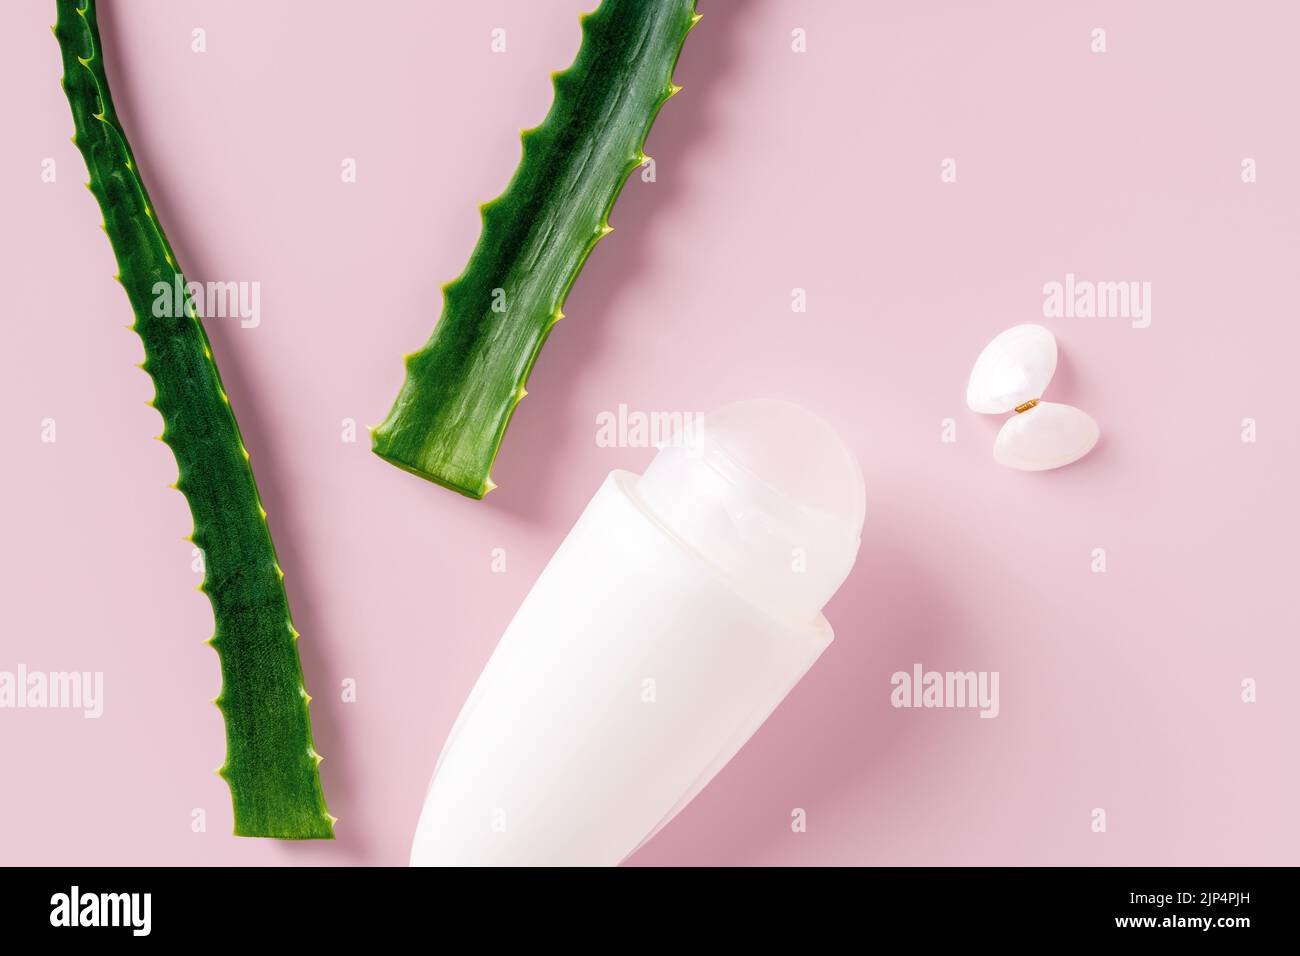 Roll on antiperspirant deodorant and fresh aloe leaves over pastel pink background. Concept of  organic cosmetics, natural toiletries, body care. Stock Photo